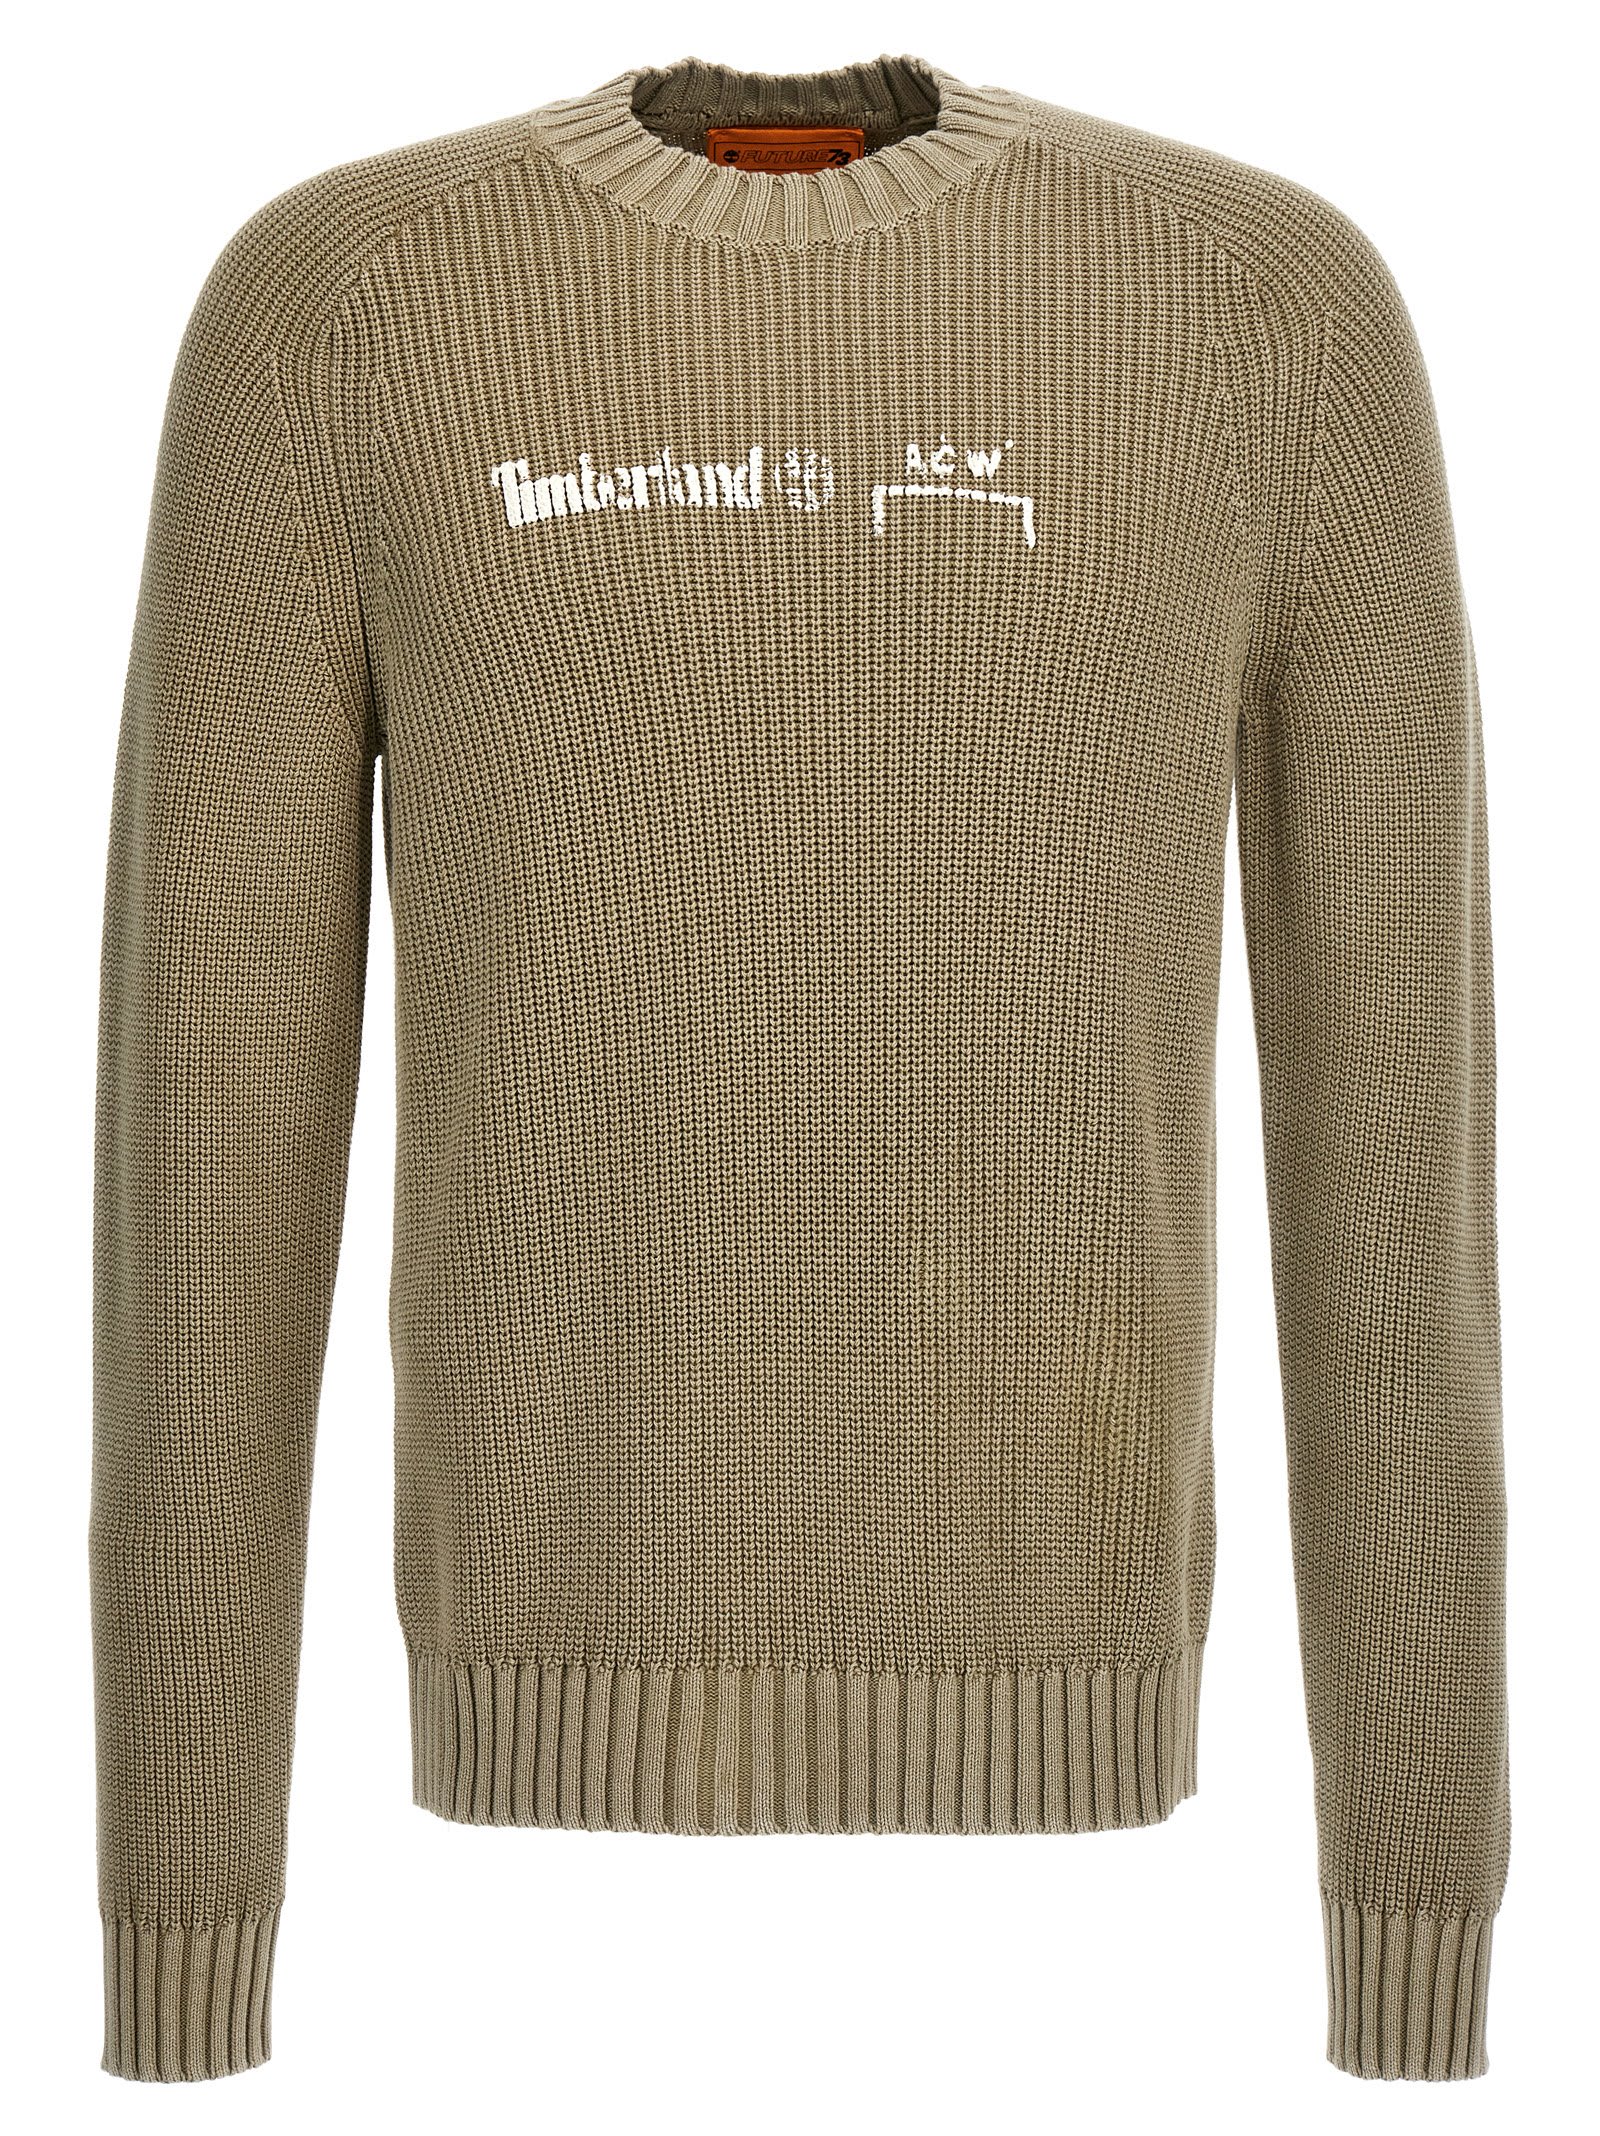 A-COLD-WALL* TIMBERLAND A-COLD-WALL* CAPSULE SWEATER